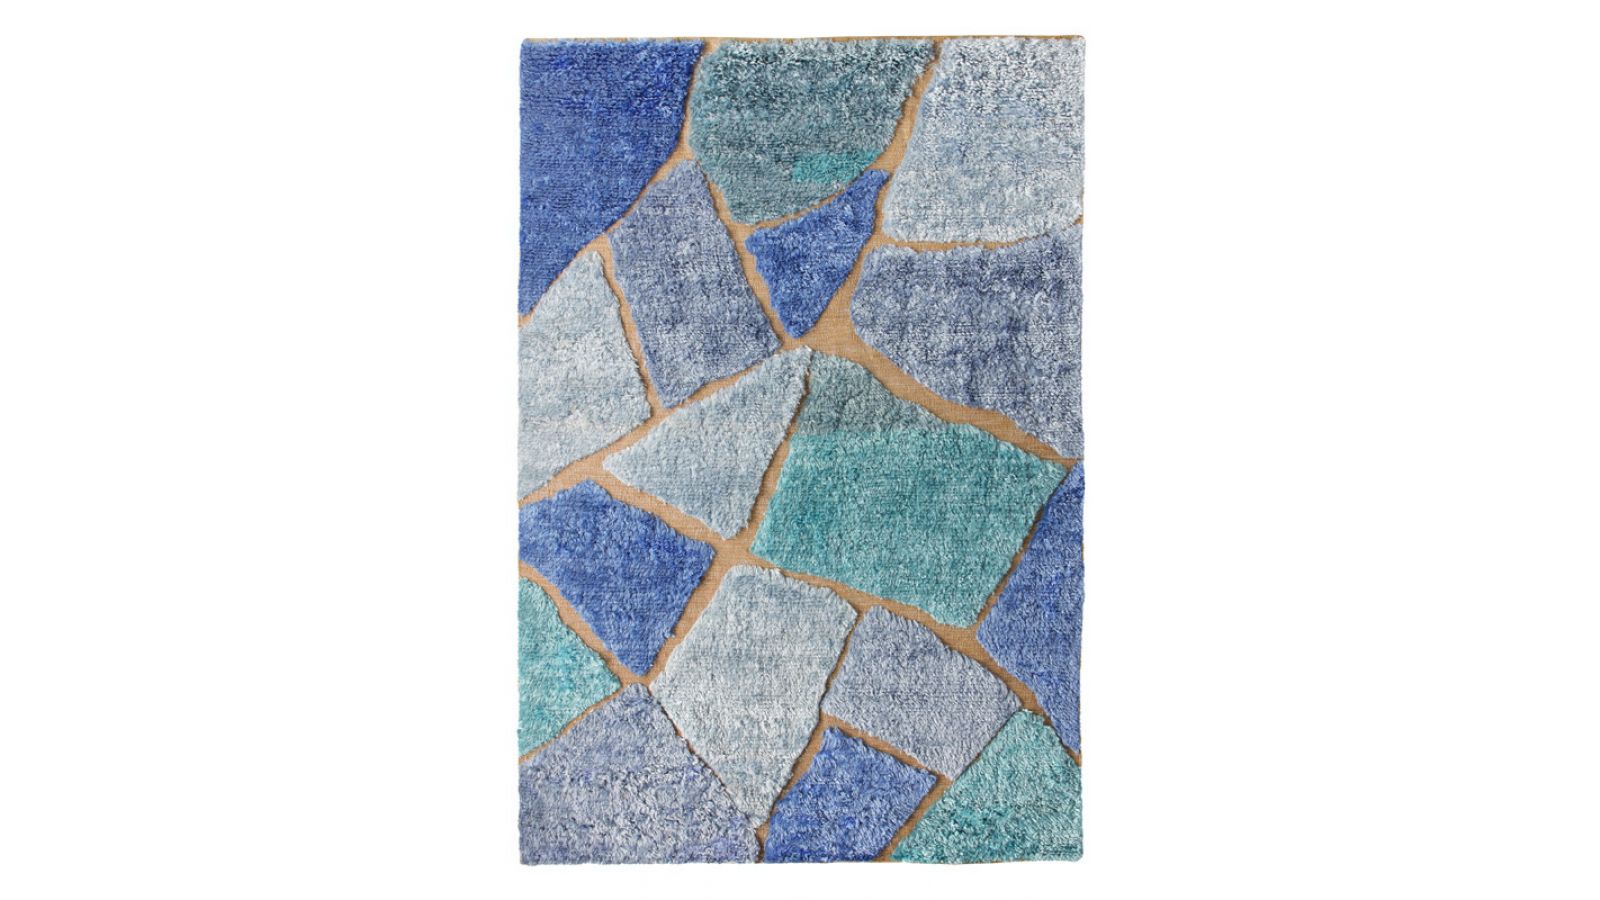 Stepping Stones/Mosaic Collection